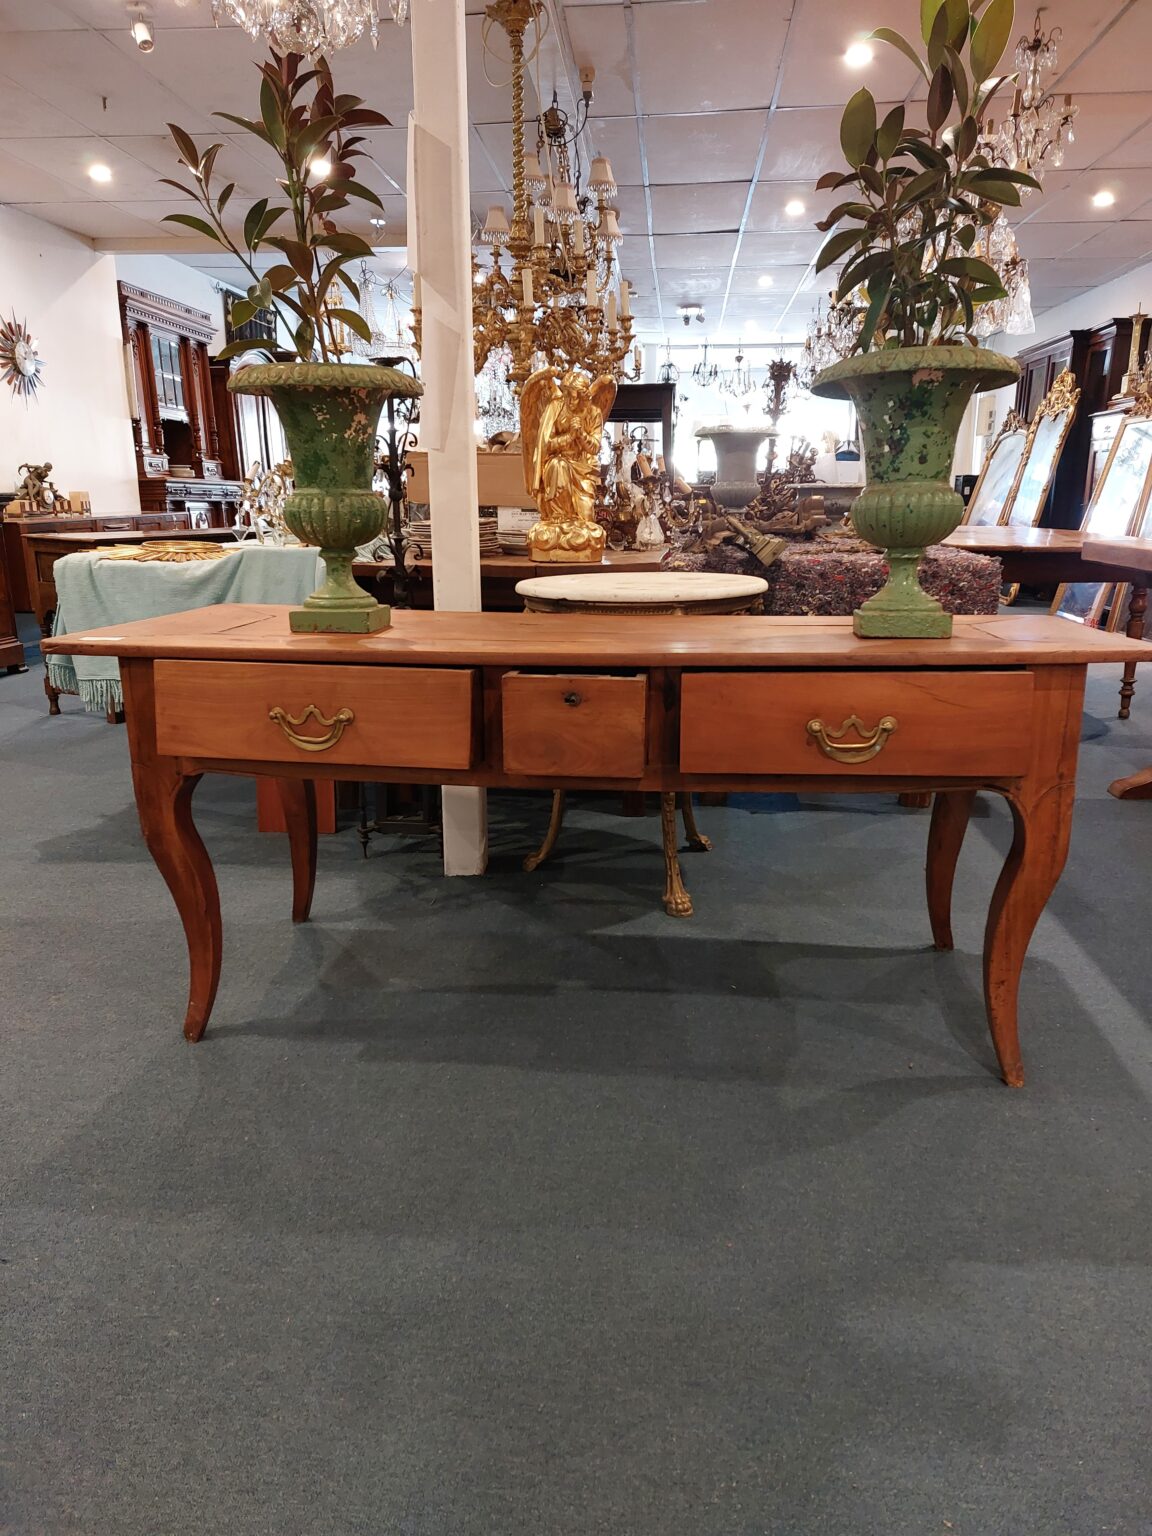 French Cherrywood side table with 3 Drawers. Shaped legs and original handles. Town and Country Antiques